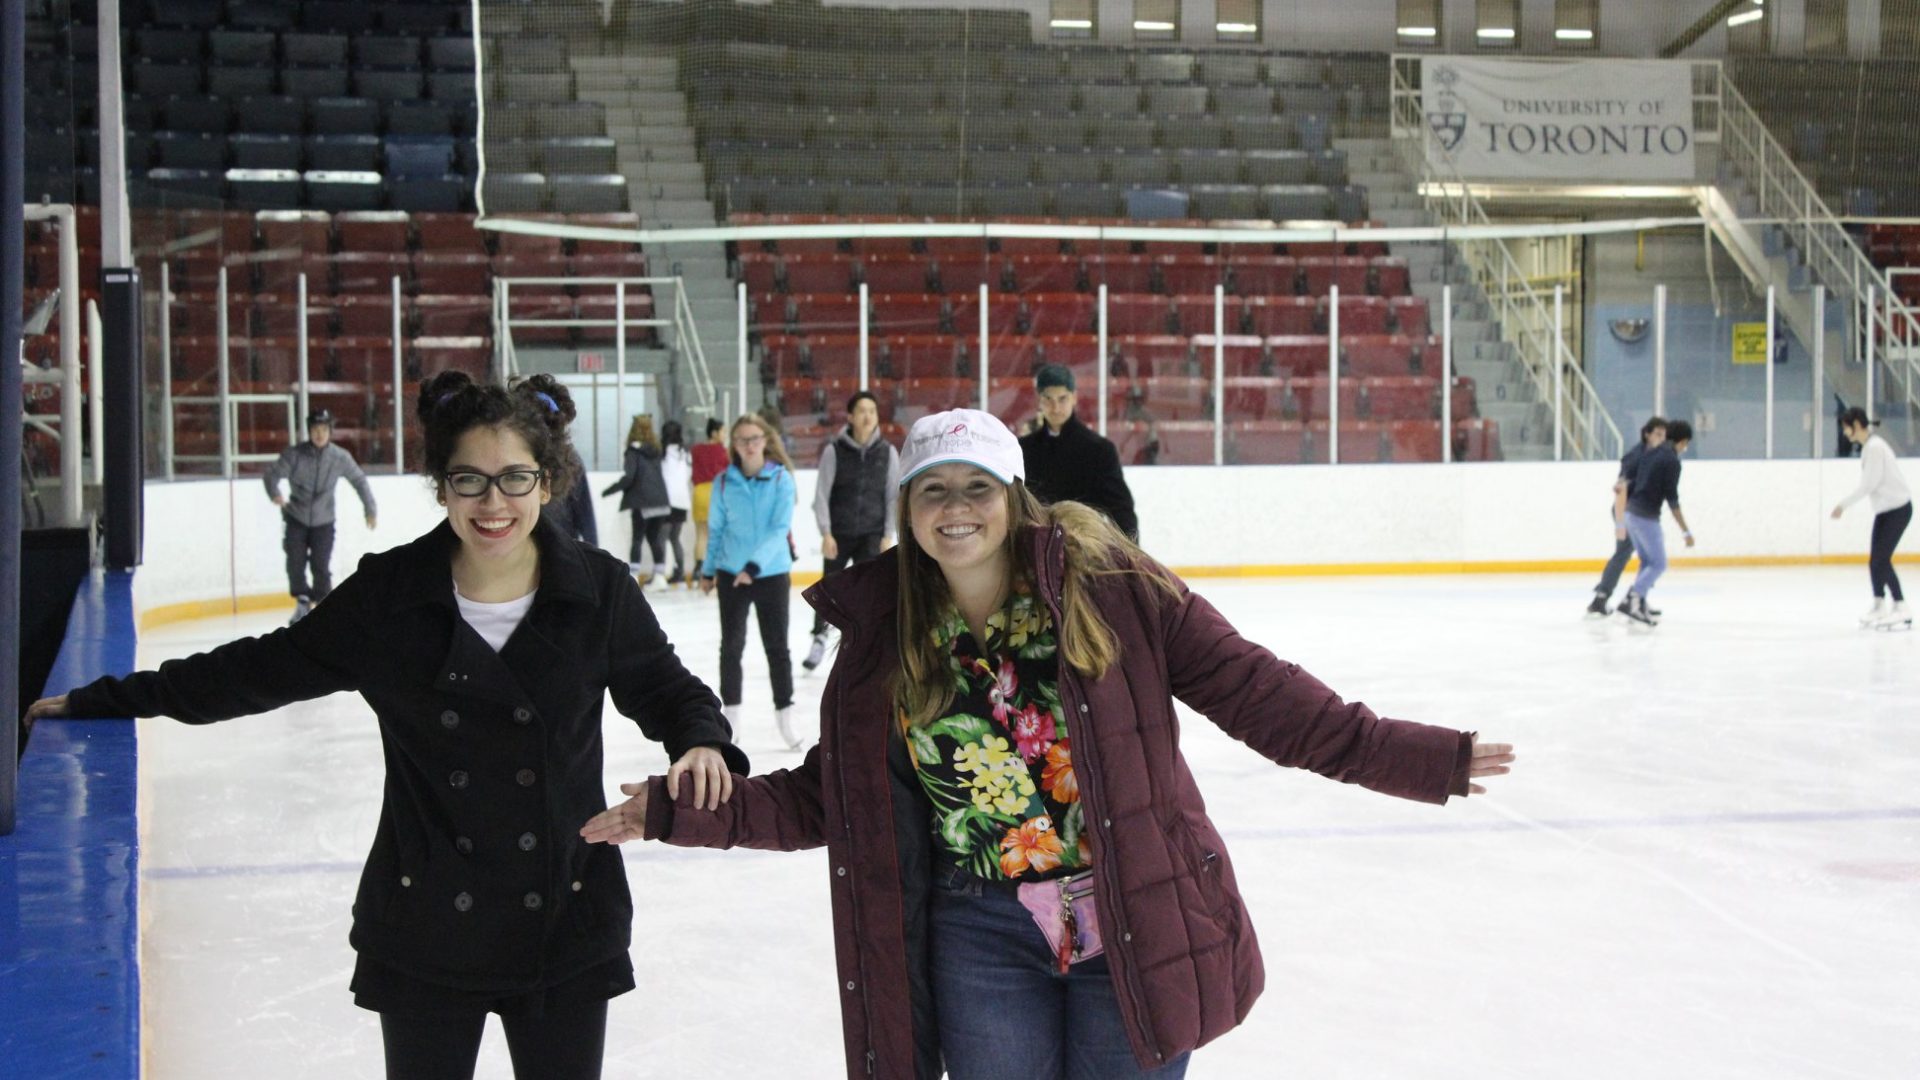 Me holding onto my friend on the ice rink